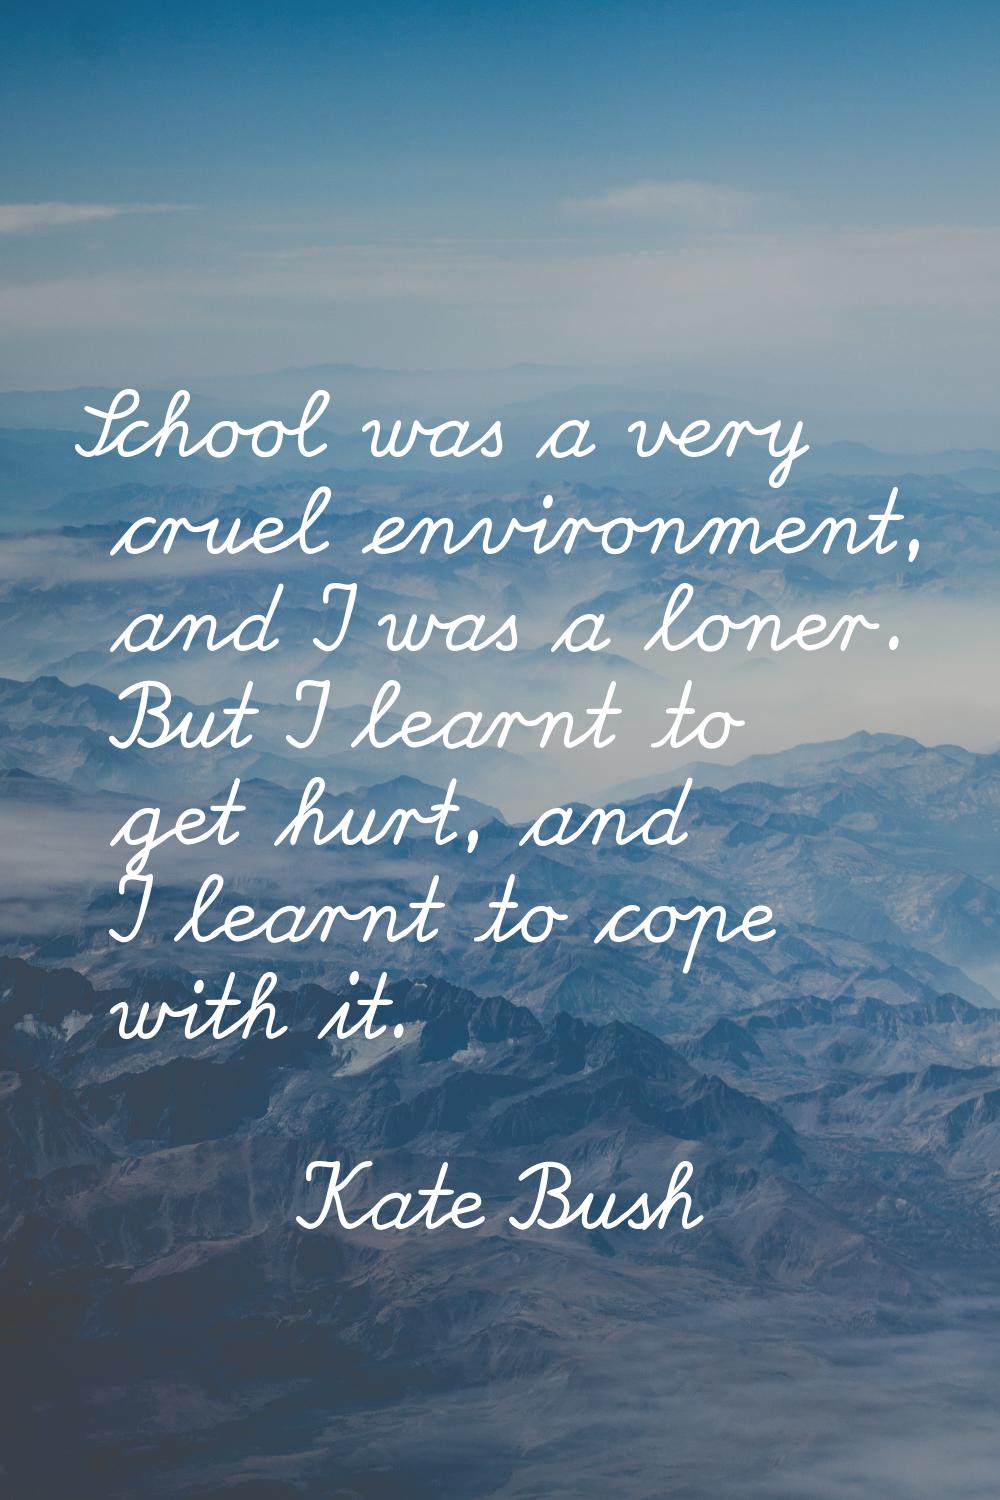 School was a very cruel environment, and I was a loner. But I learnt to get hurt, and I learnt to c